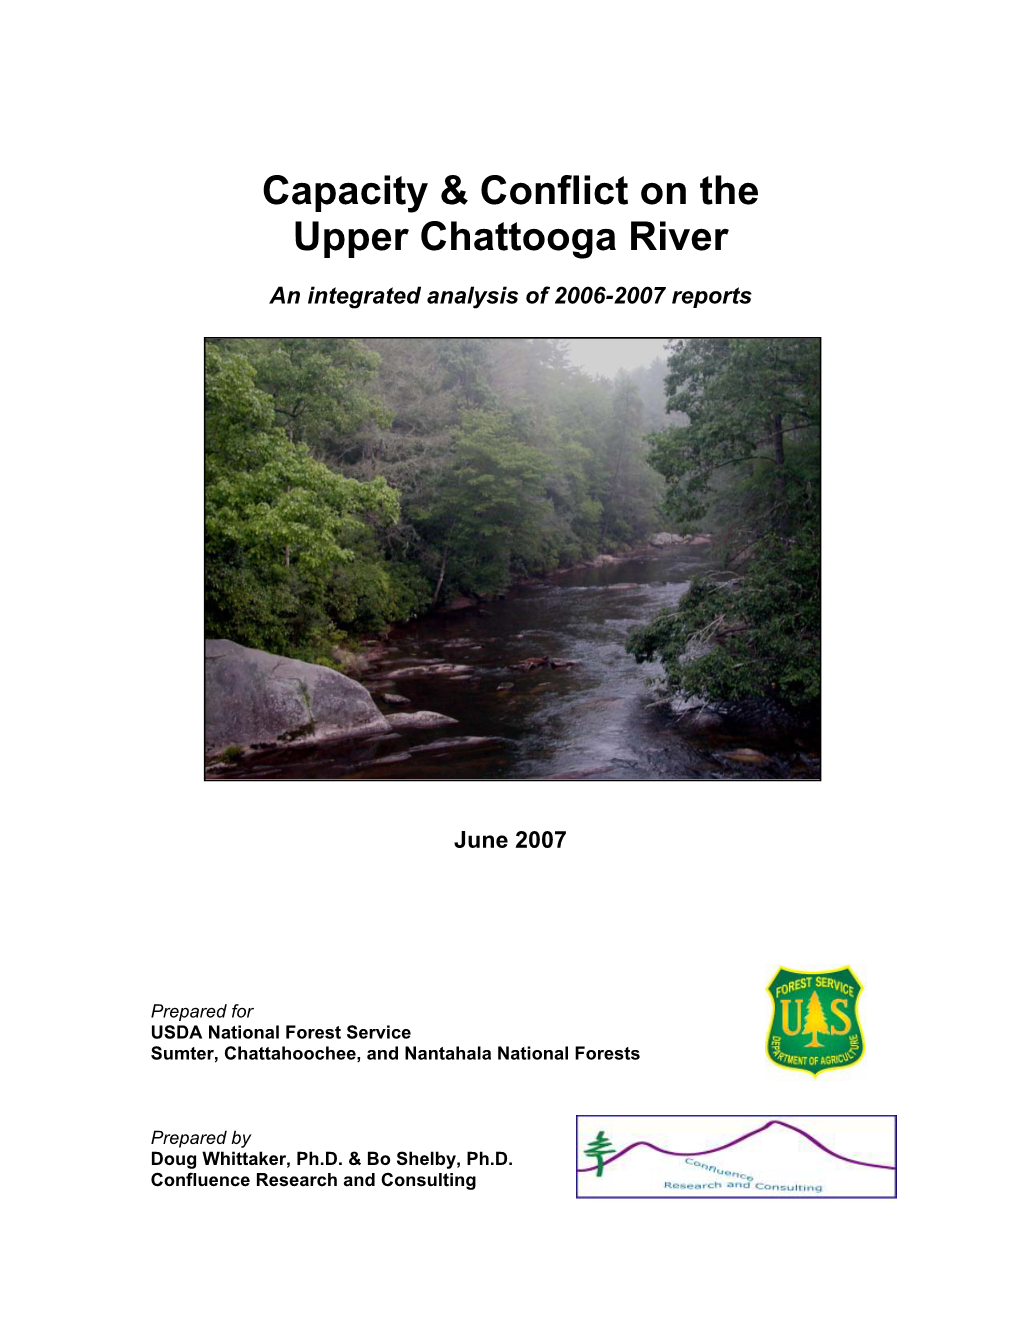 Capacity & Conflict on the Upper Chattooga River